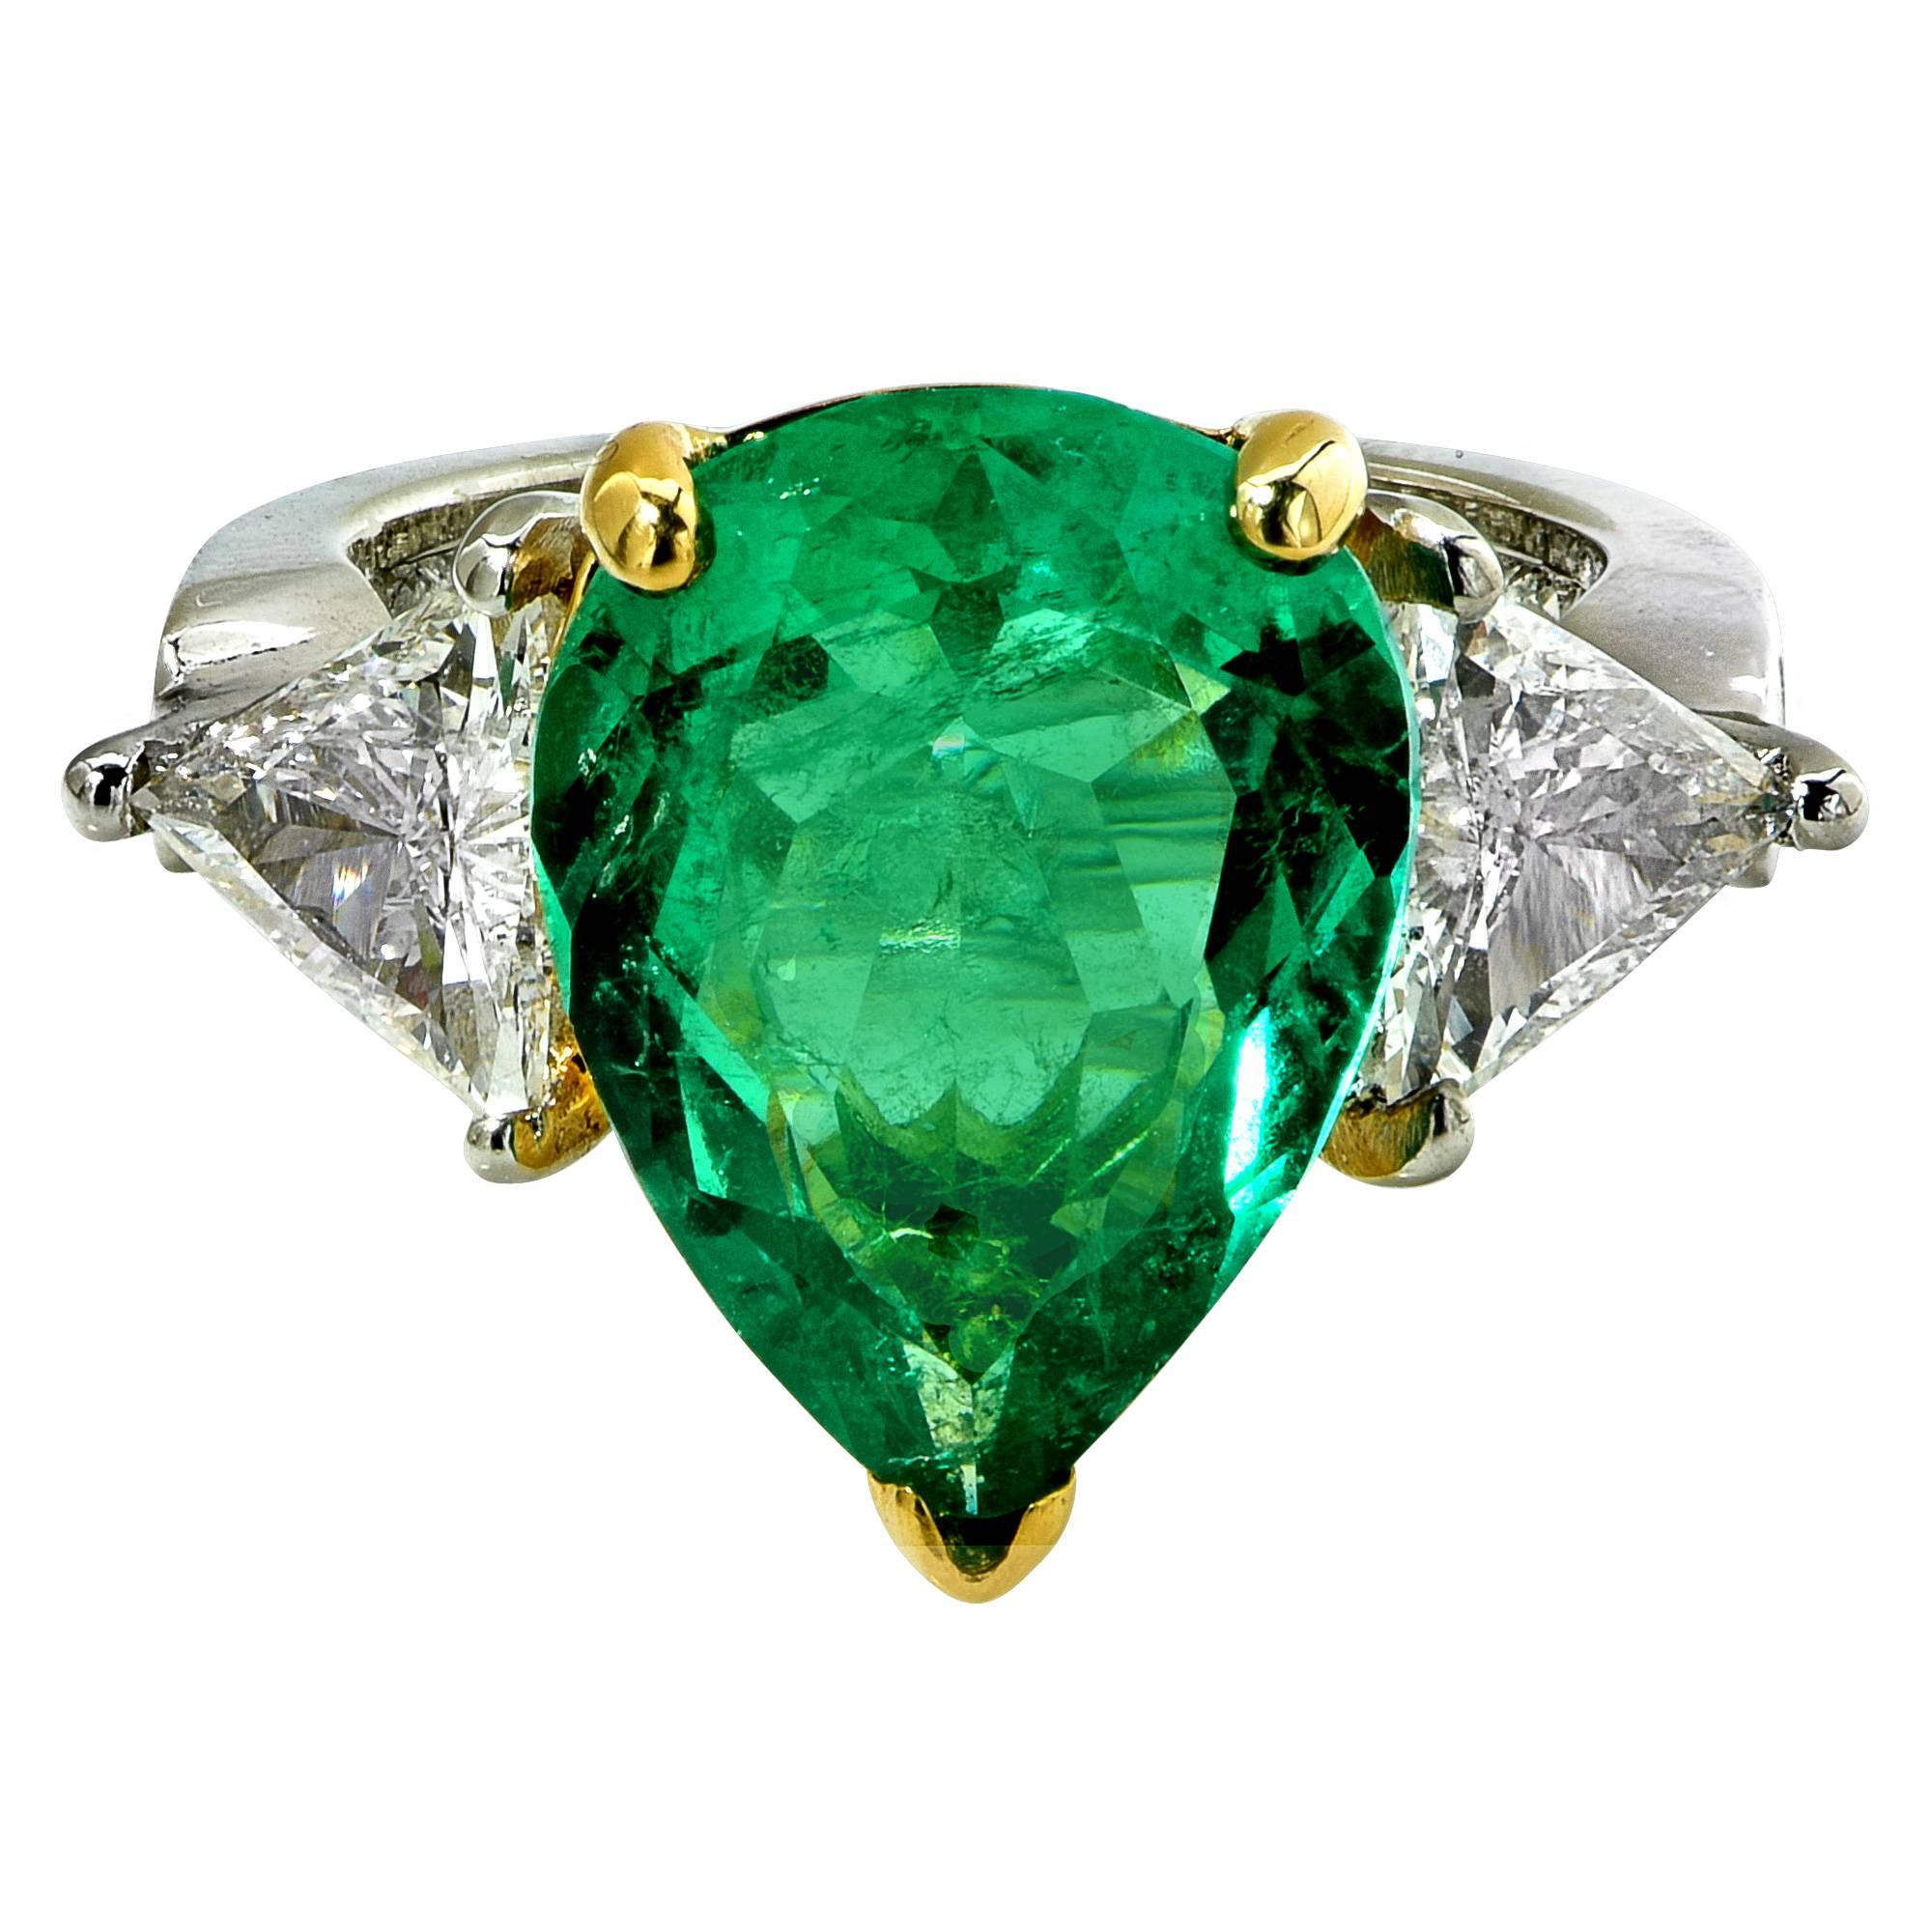 Platinum lady's ring featuring a pear shape emerald weighing 4.34cts flanked by two trilliant cut diamonds with an estimated total weight of 1.80cts, G-H color, VS clarity, accented by 48 princess and round cut diamonds weighing approximately